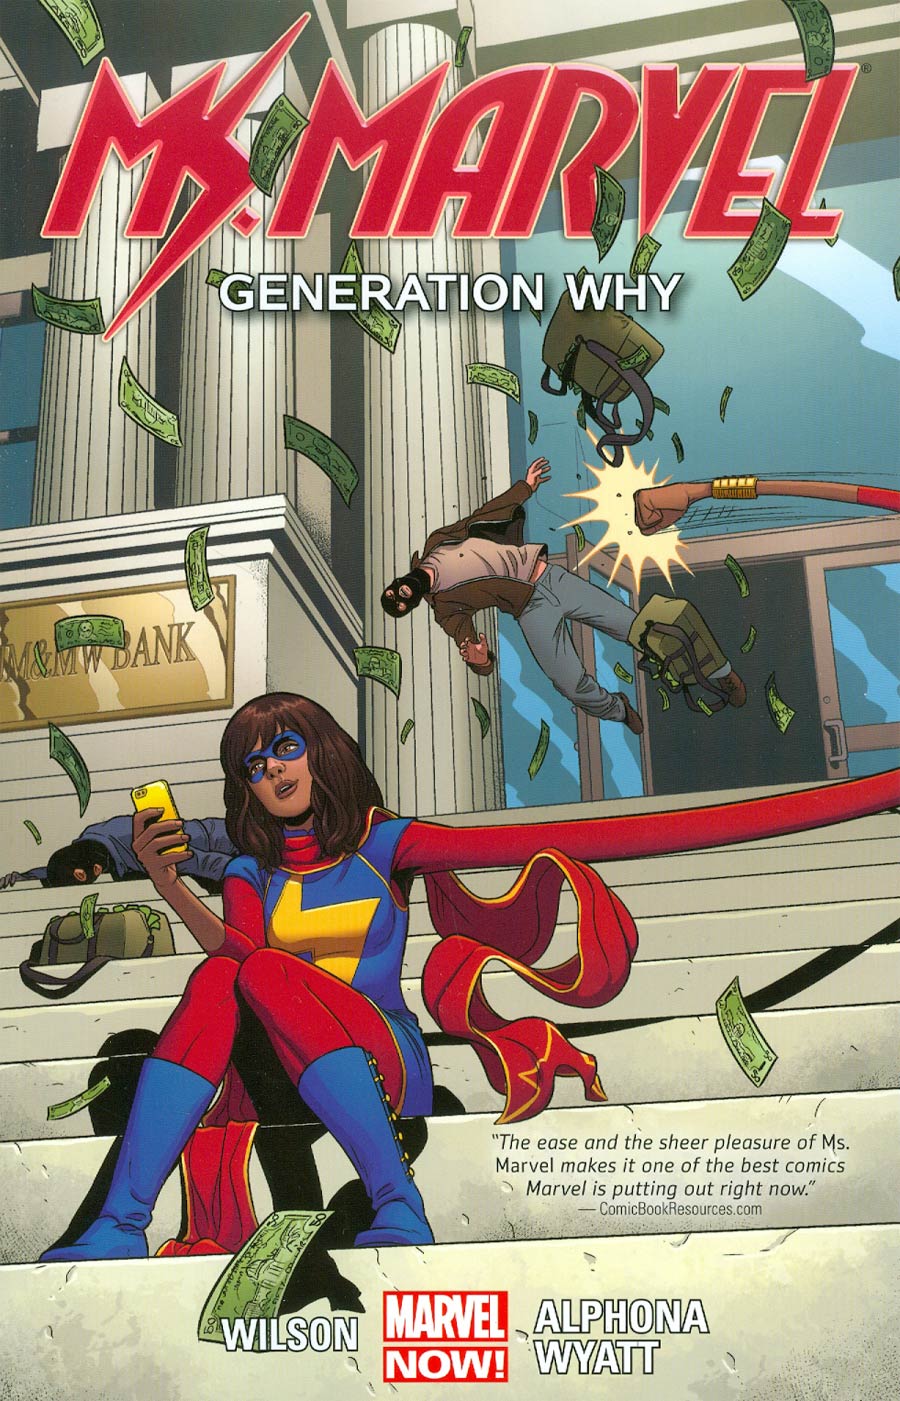 Ms Marvel (2014) Vol 2 Generation Why TP